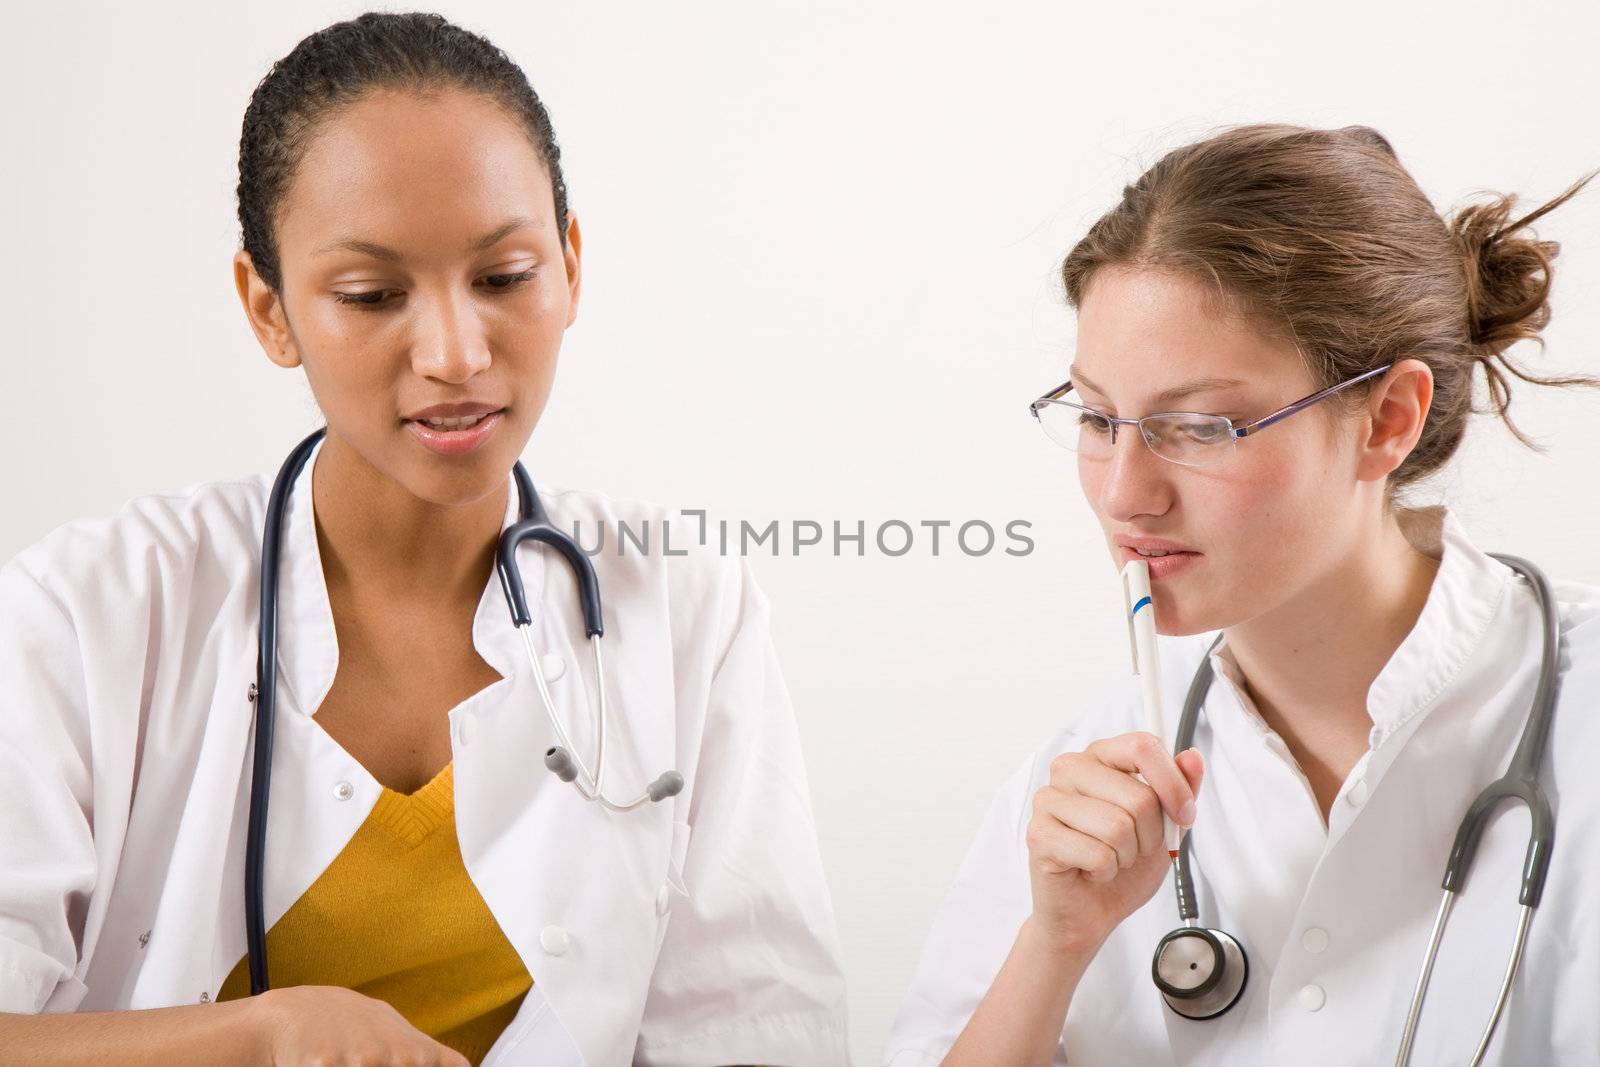 Medical discussion by Fotosmurf